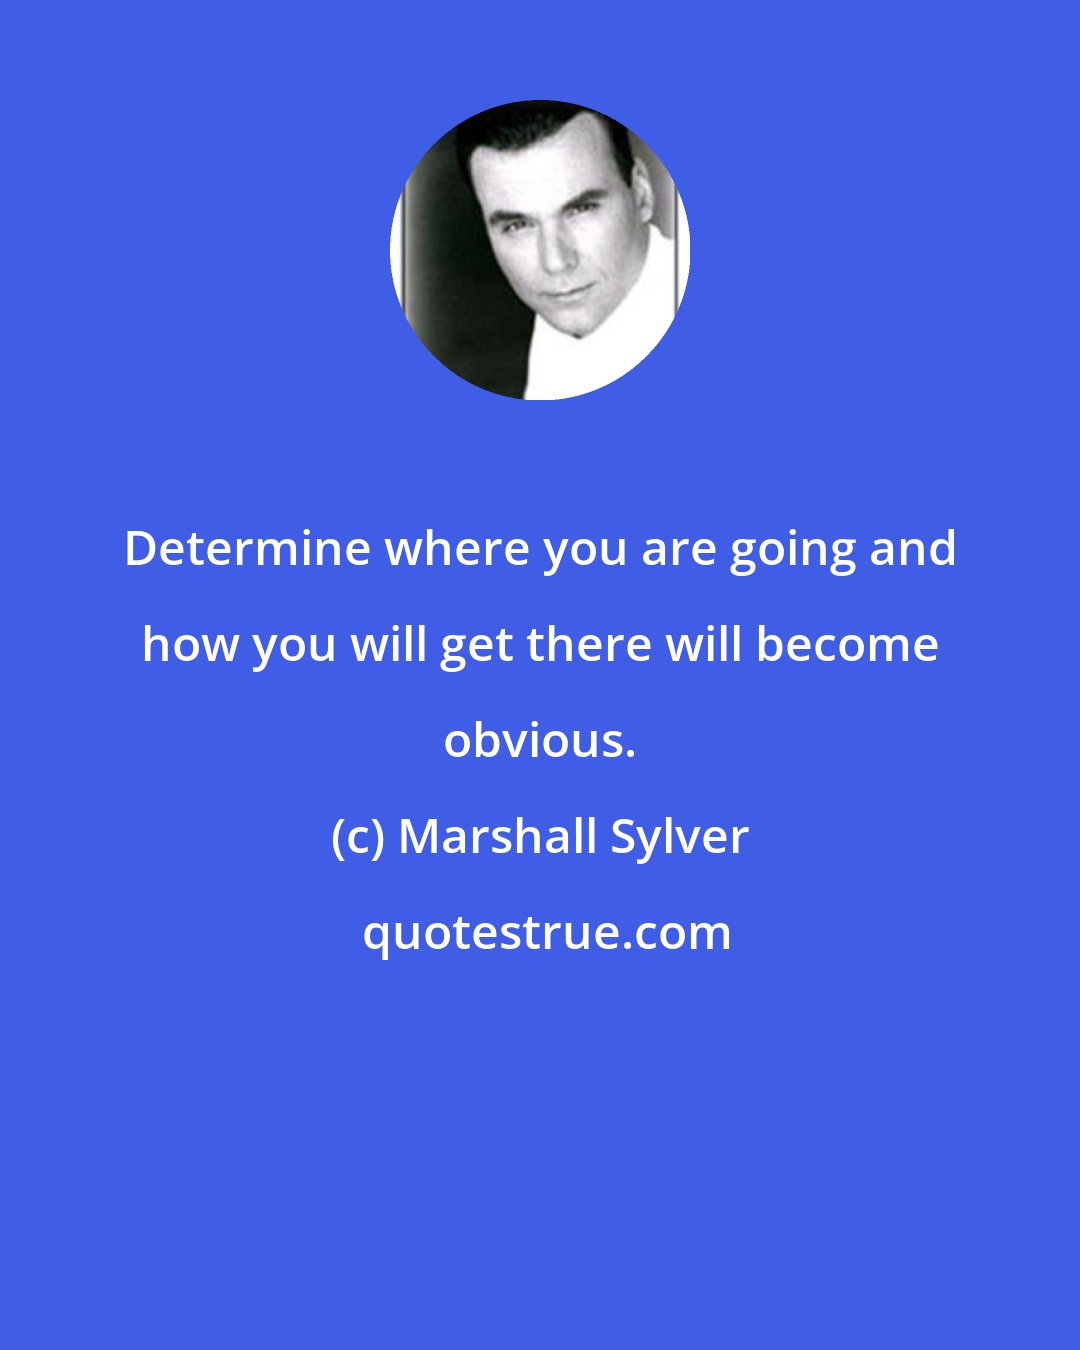 Marshall Sylver: Determine where you are going and how you will get there will become obvious.